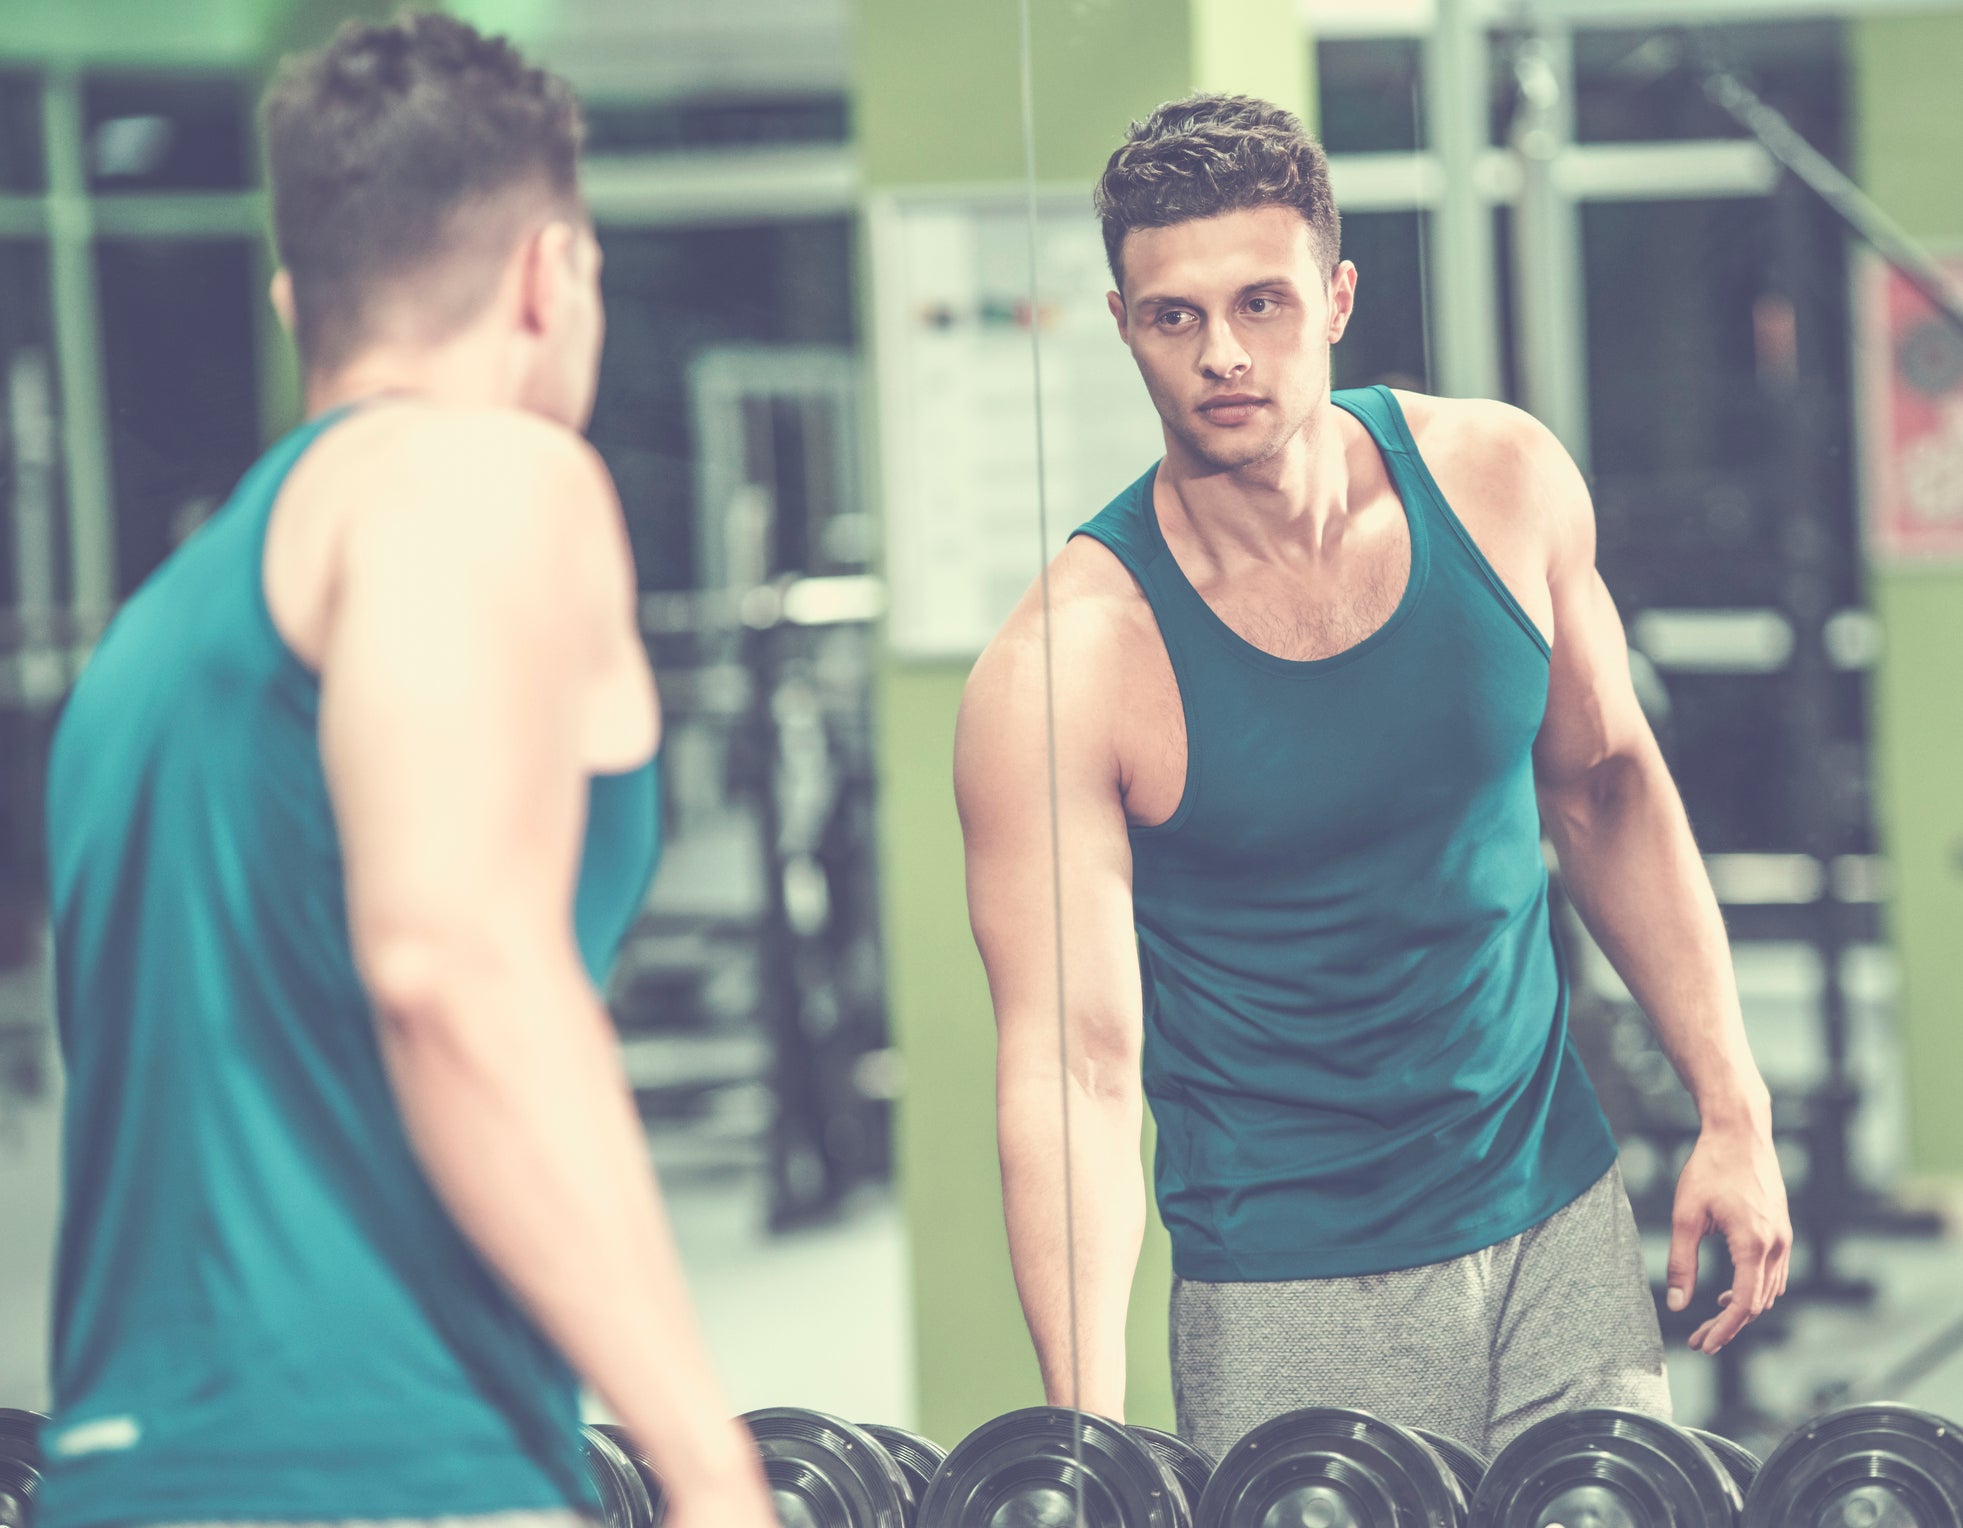 Research shows some men even seek a muscular physique to cope with bullying and emasculation from family members and romantic partners